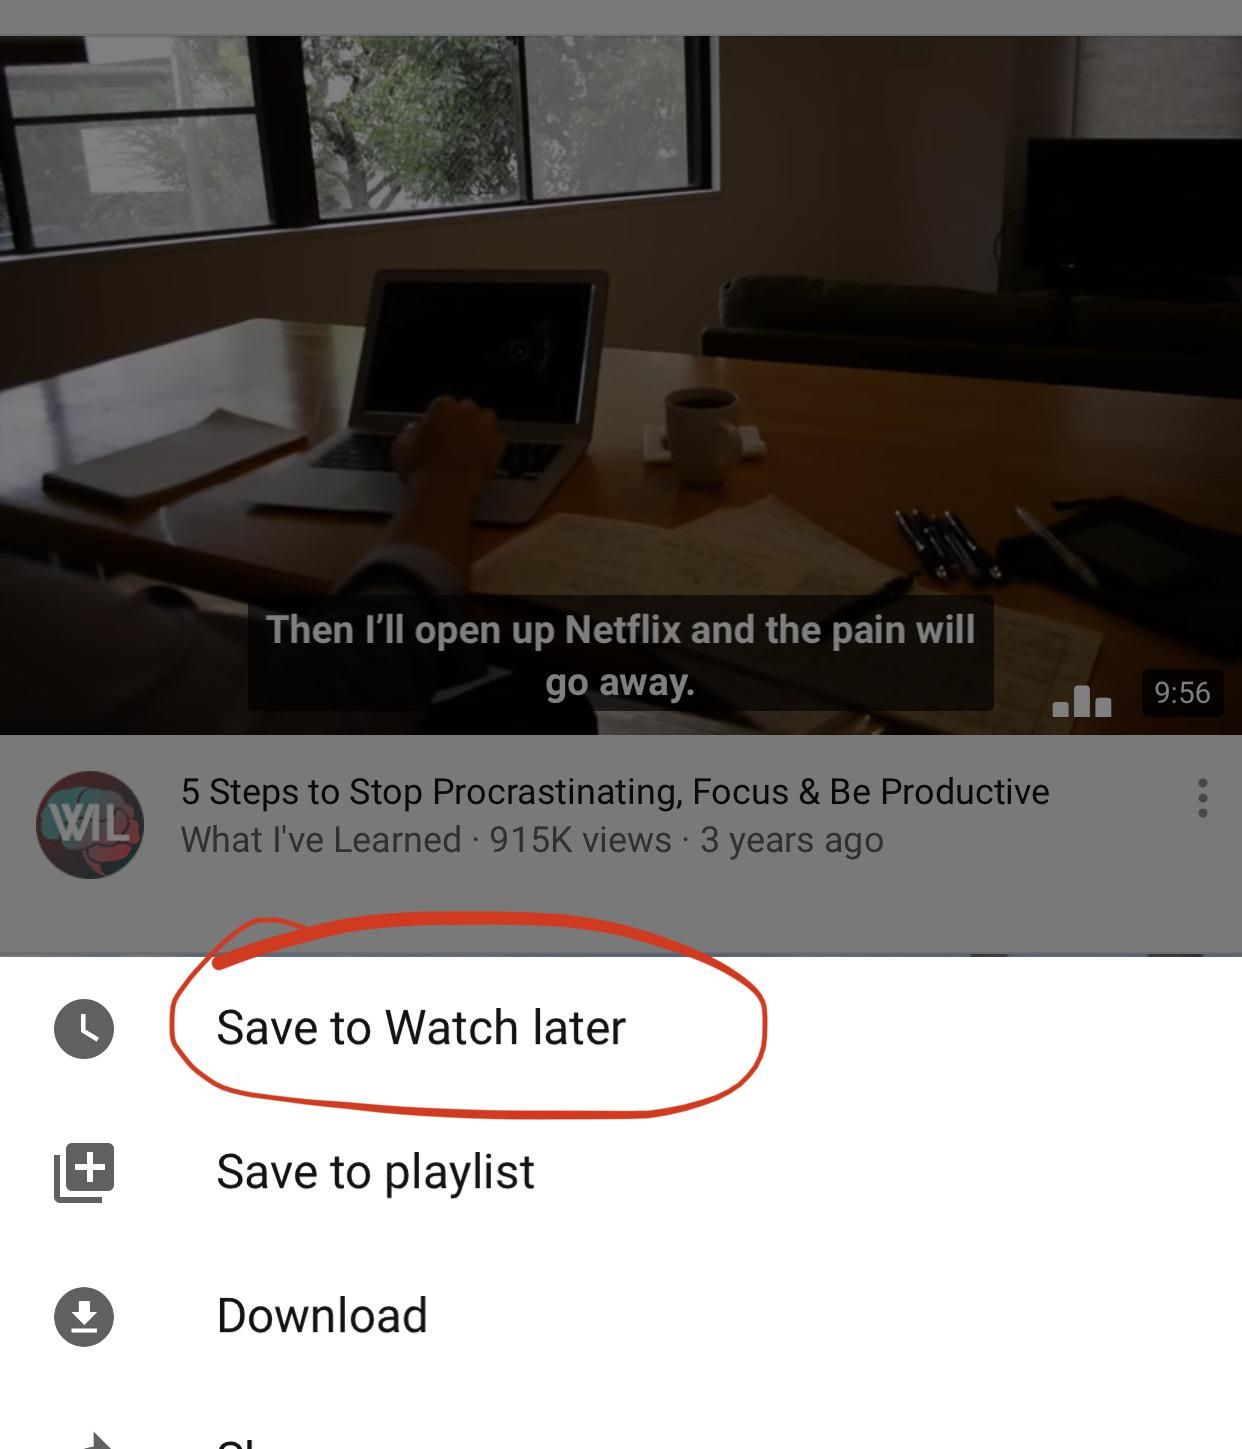 While browsing YouTube, I realized the irony of what I was about to do